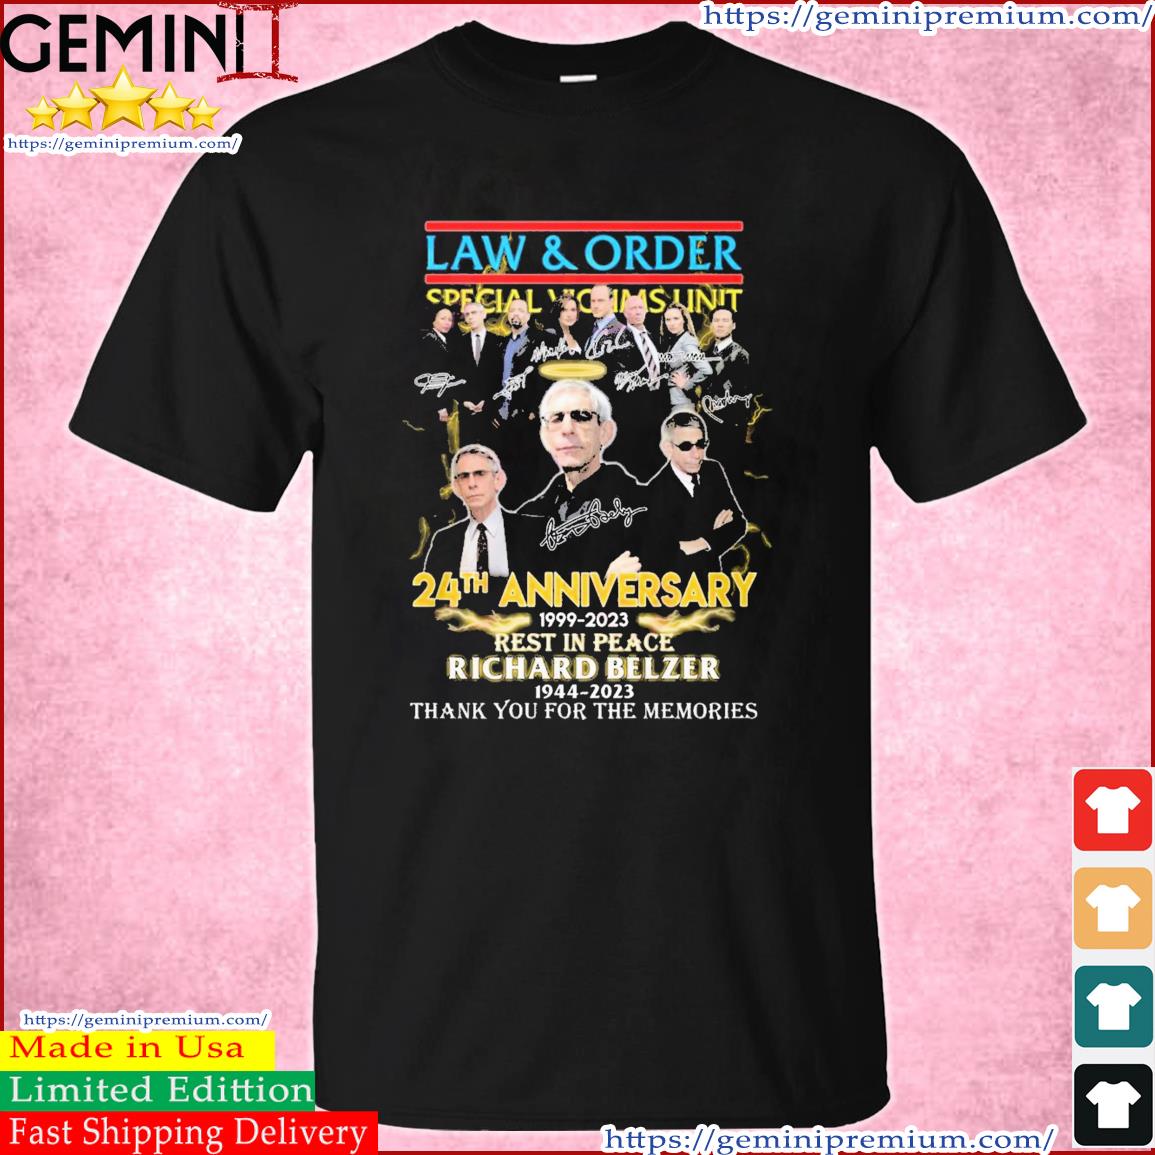 Law & Order 24th Anniversary 1999 – 2023 Rest In Peace Richard Belzer 1944 – 2023 Thank You For The Memories Shirt